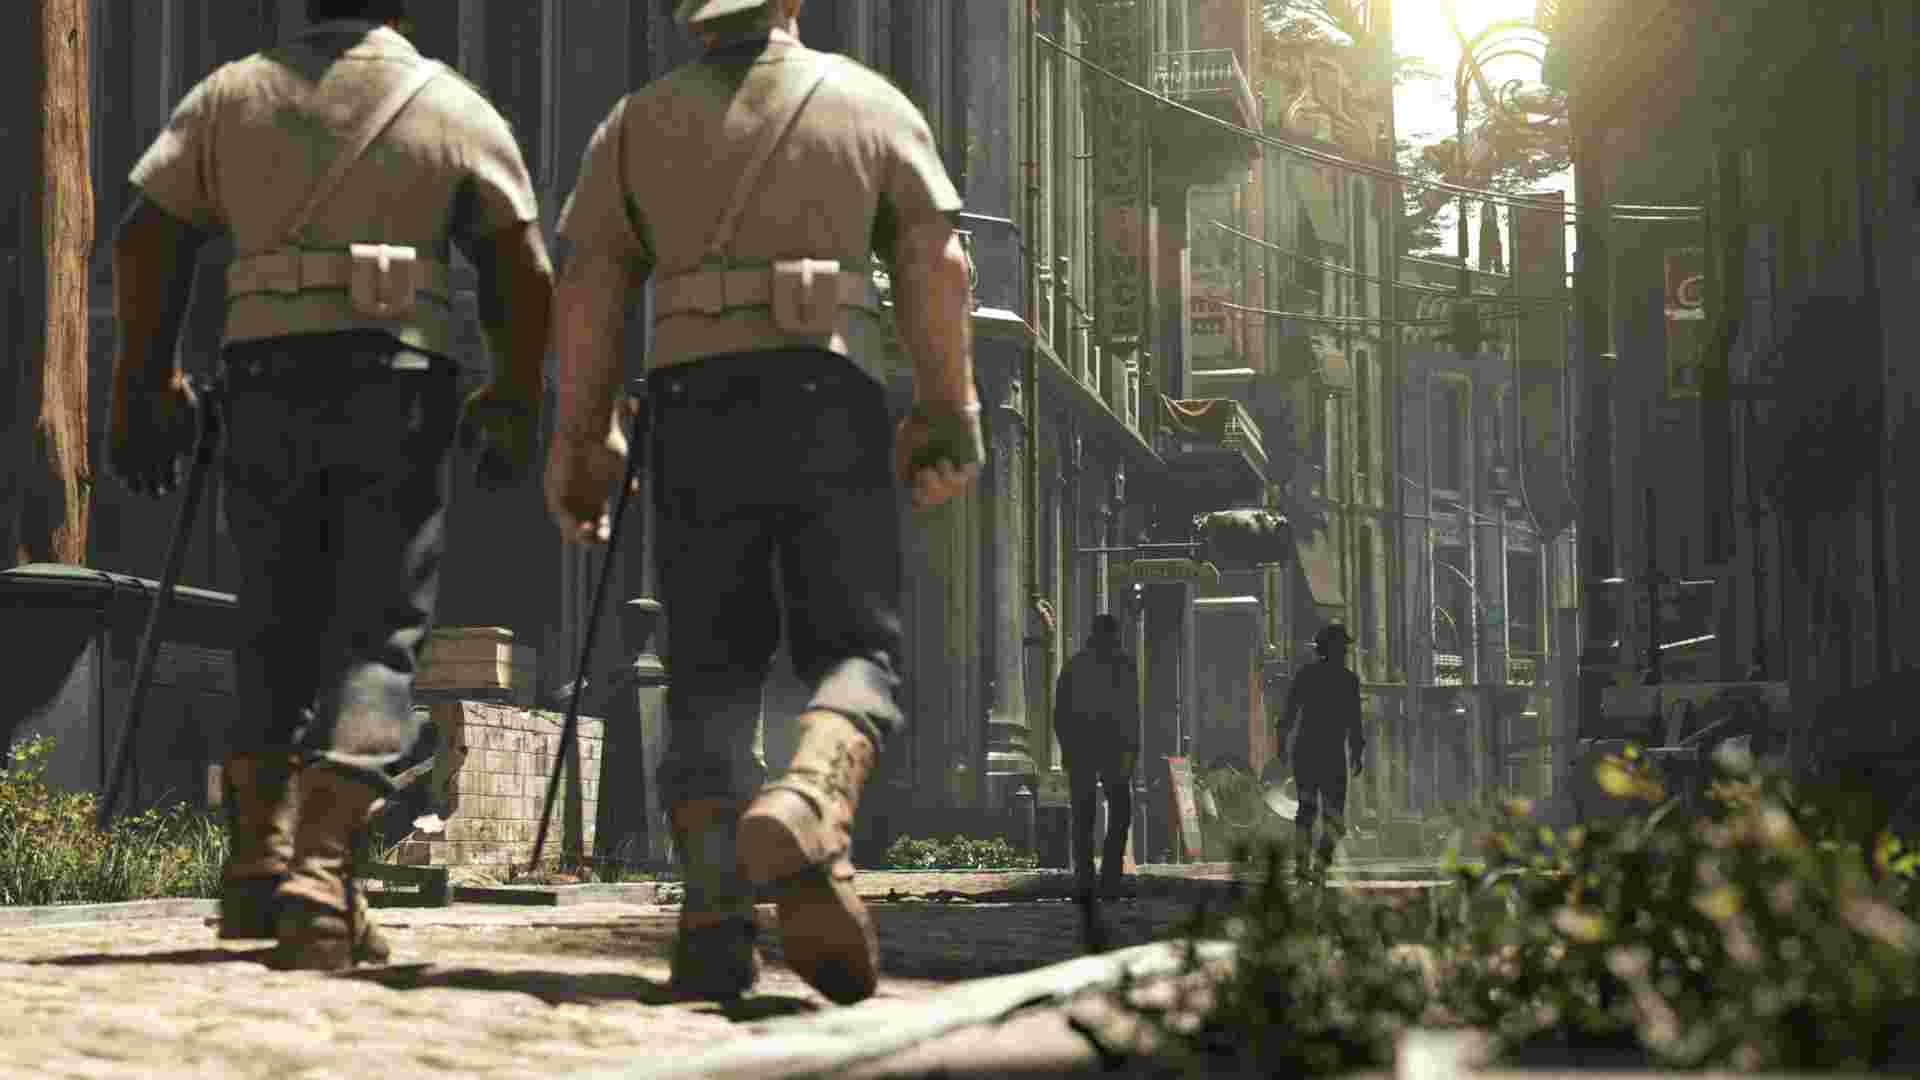 download dishonored game play for free